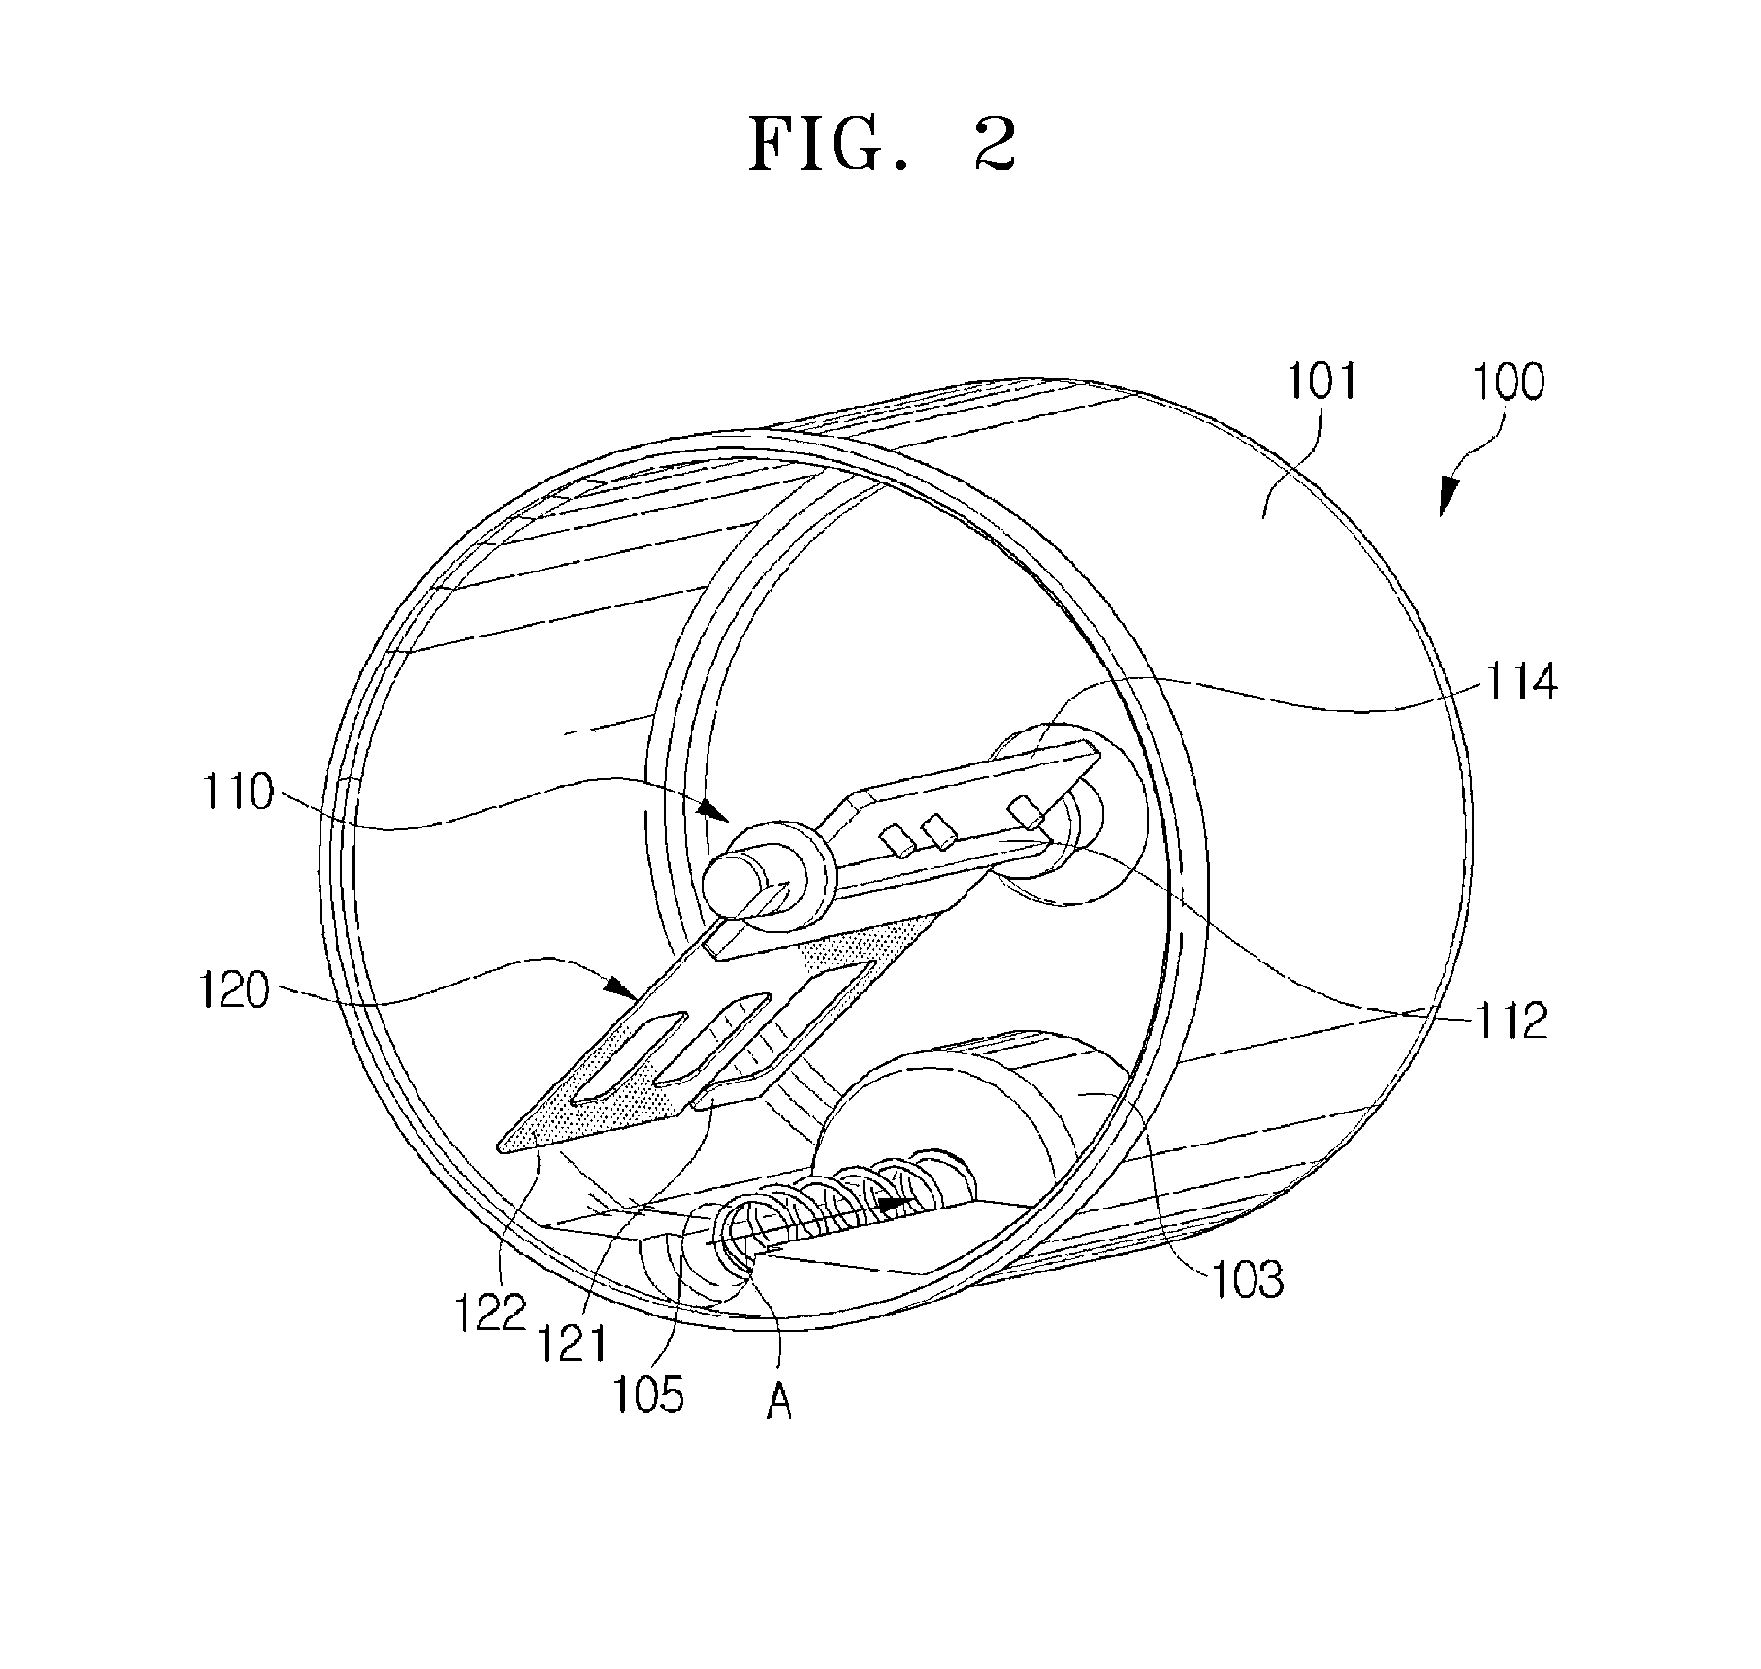 Toner for developing electrostatic charge image, method of preparing the same, device for supplying the same, and apparatus and method for forming image using the same